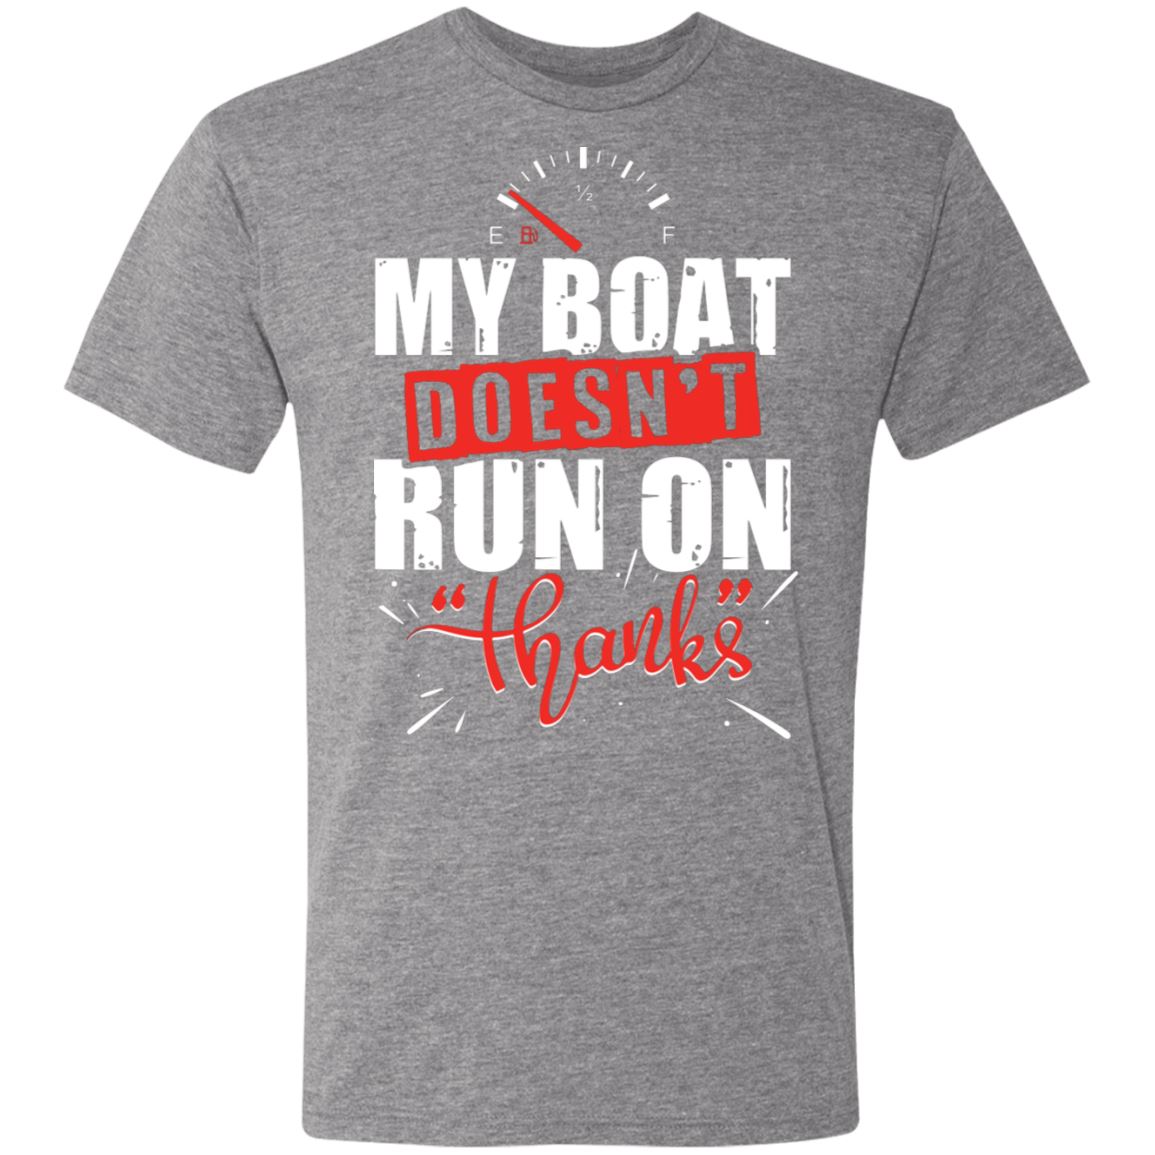 My Boat Doesn't Run On Thanks Men's Triblend T-Shirt - Houseboat Kings